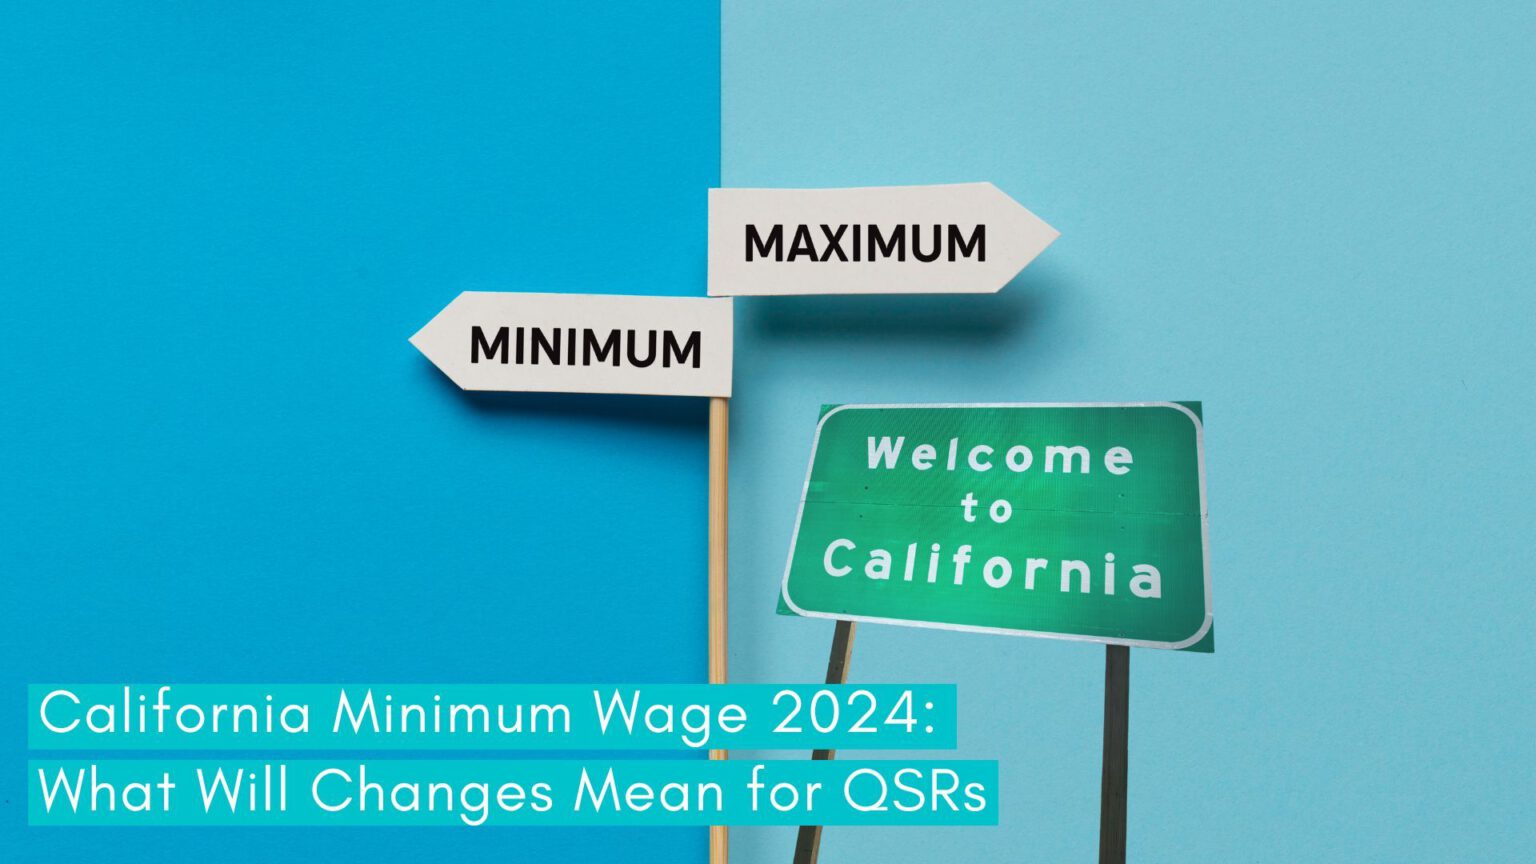 California Minimum Wage 2024 What Will Changes Mean for QSRs